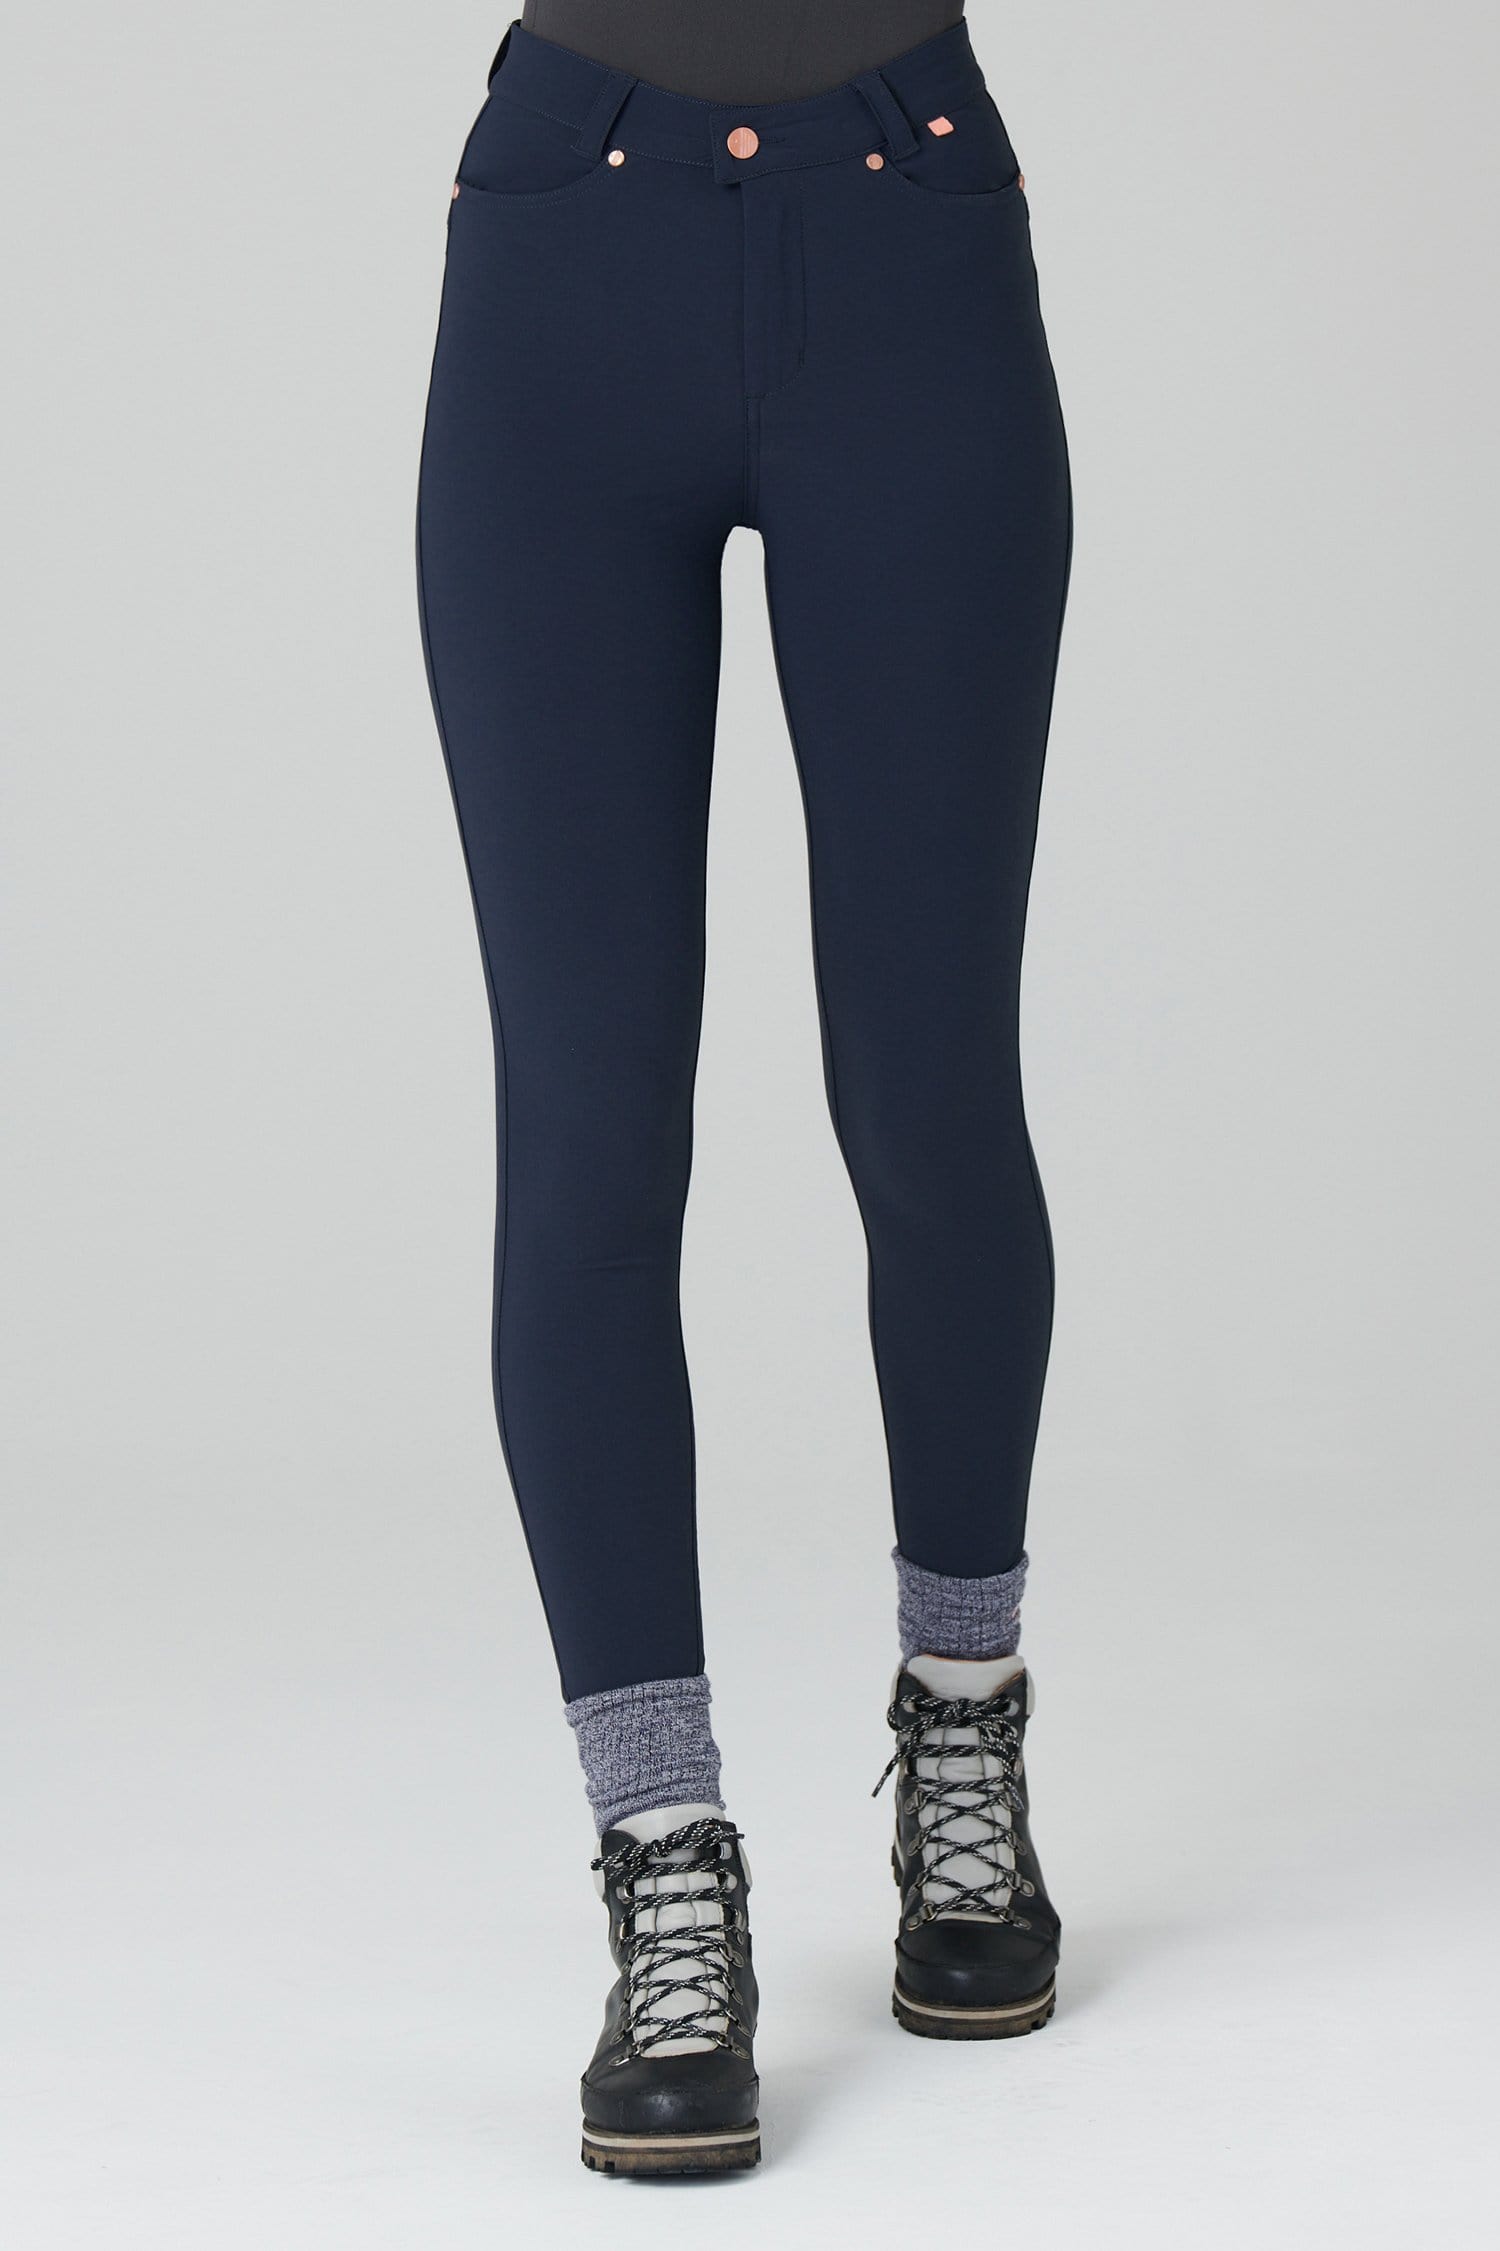 Thermal Skinny Outdoor Trousers - Deep Navy - 34l / Uk16 - Womens - Acai Outdoorwear